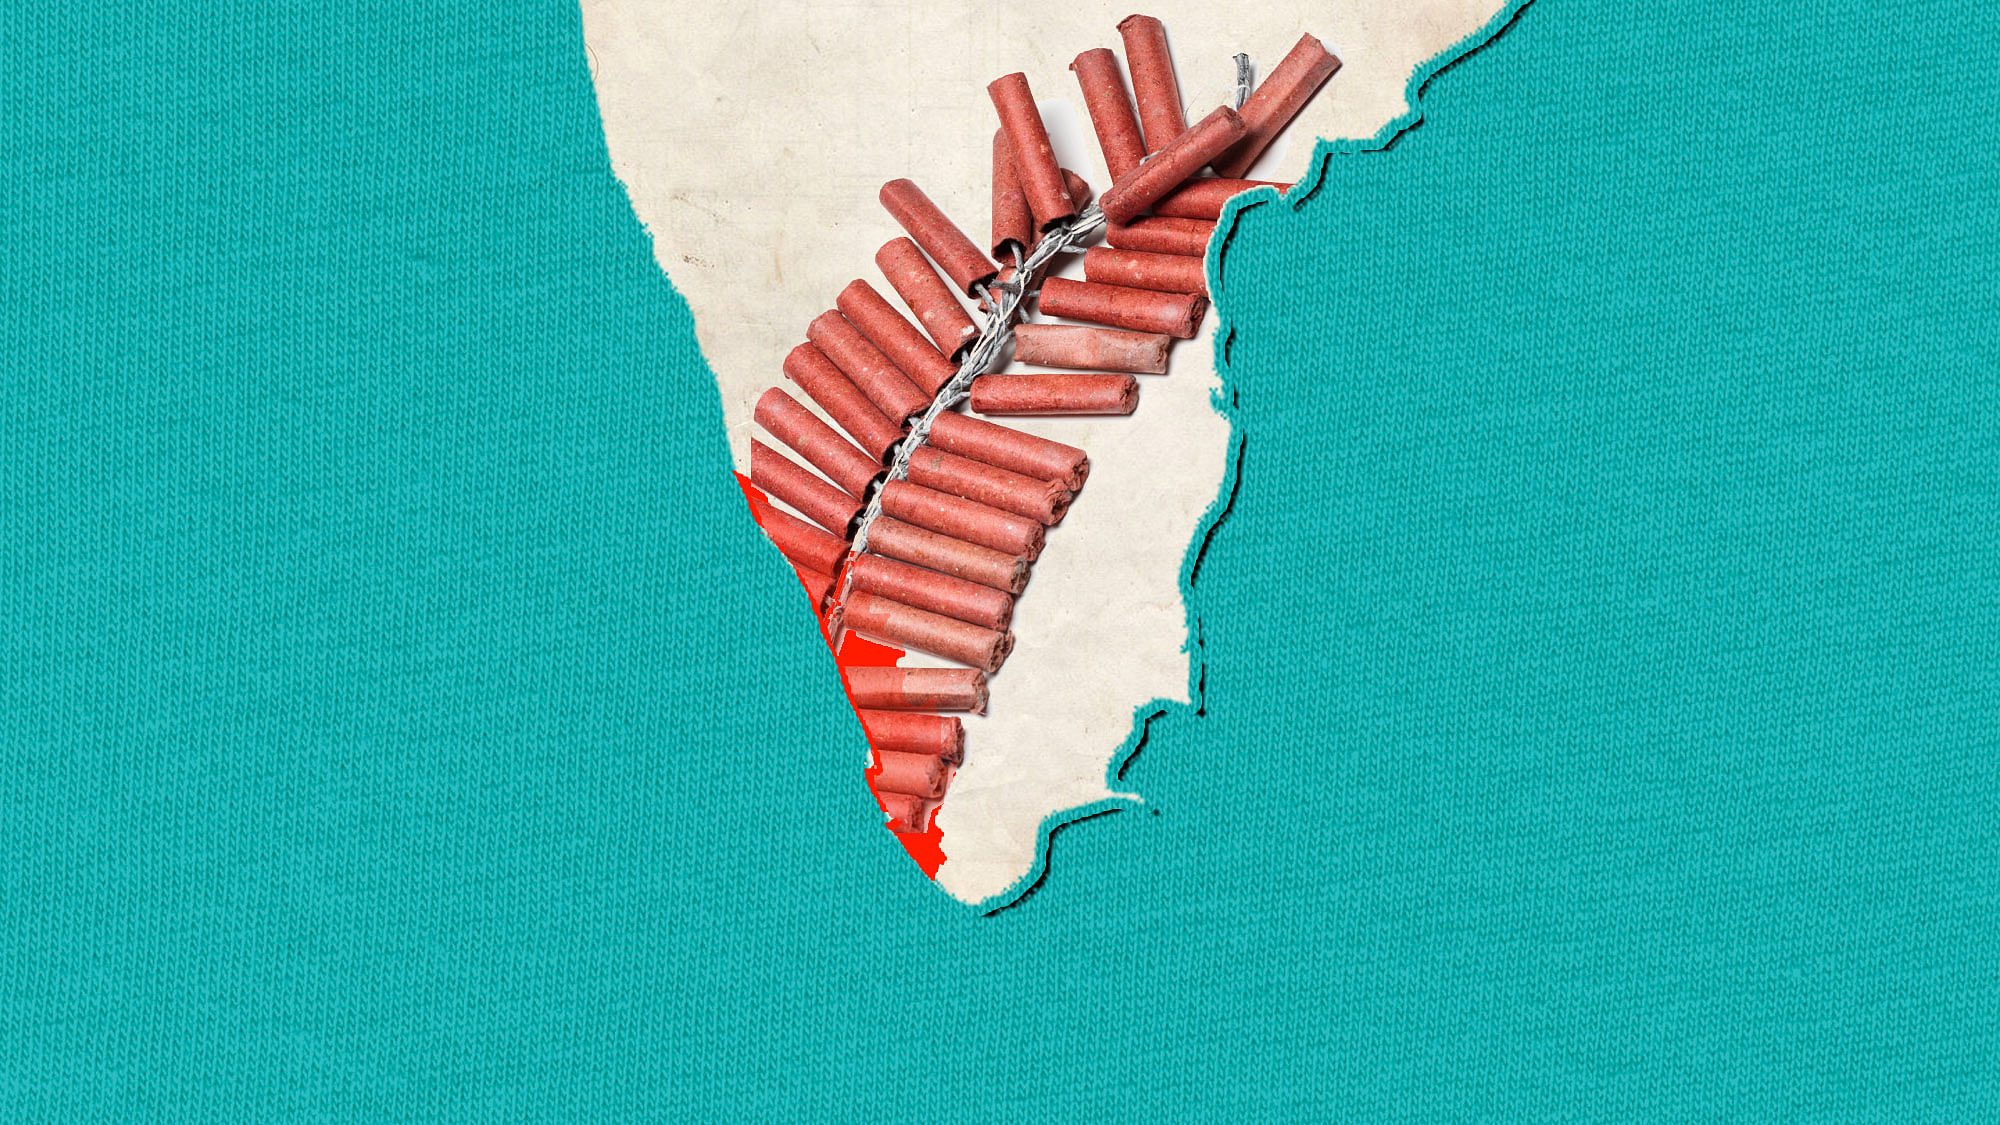 Kerala’s Kollam Temple fire is not an isolated incident. But is anyone learning? (Design: Aaqib Raza Khan/<b>The Quint)</b>